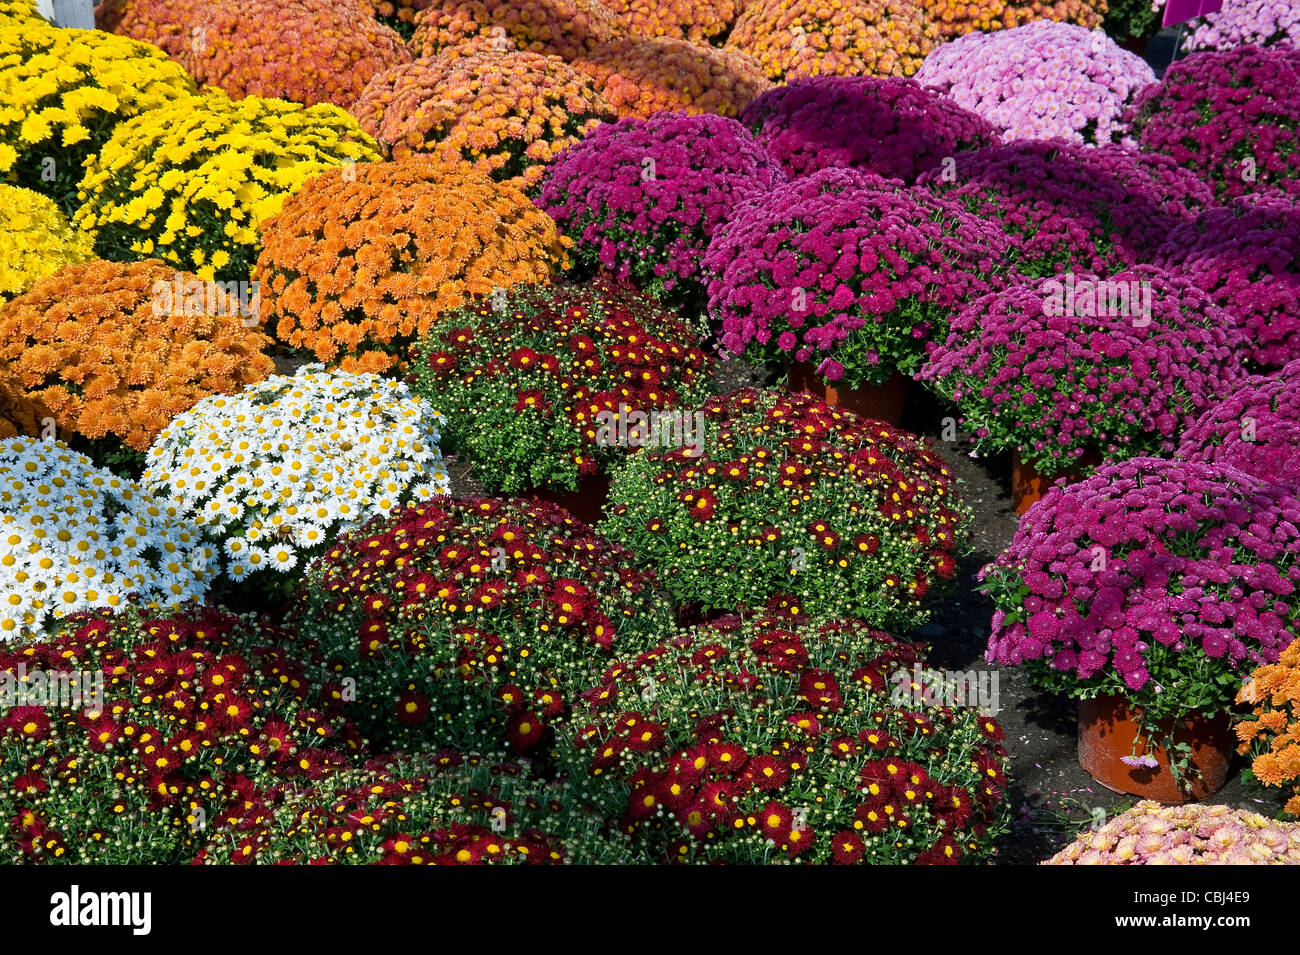 Many Different Colored Chrysanthemum Flowers Stock Photo